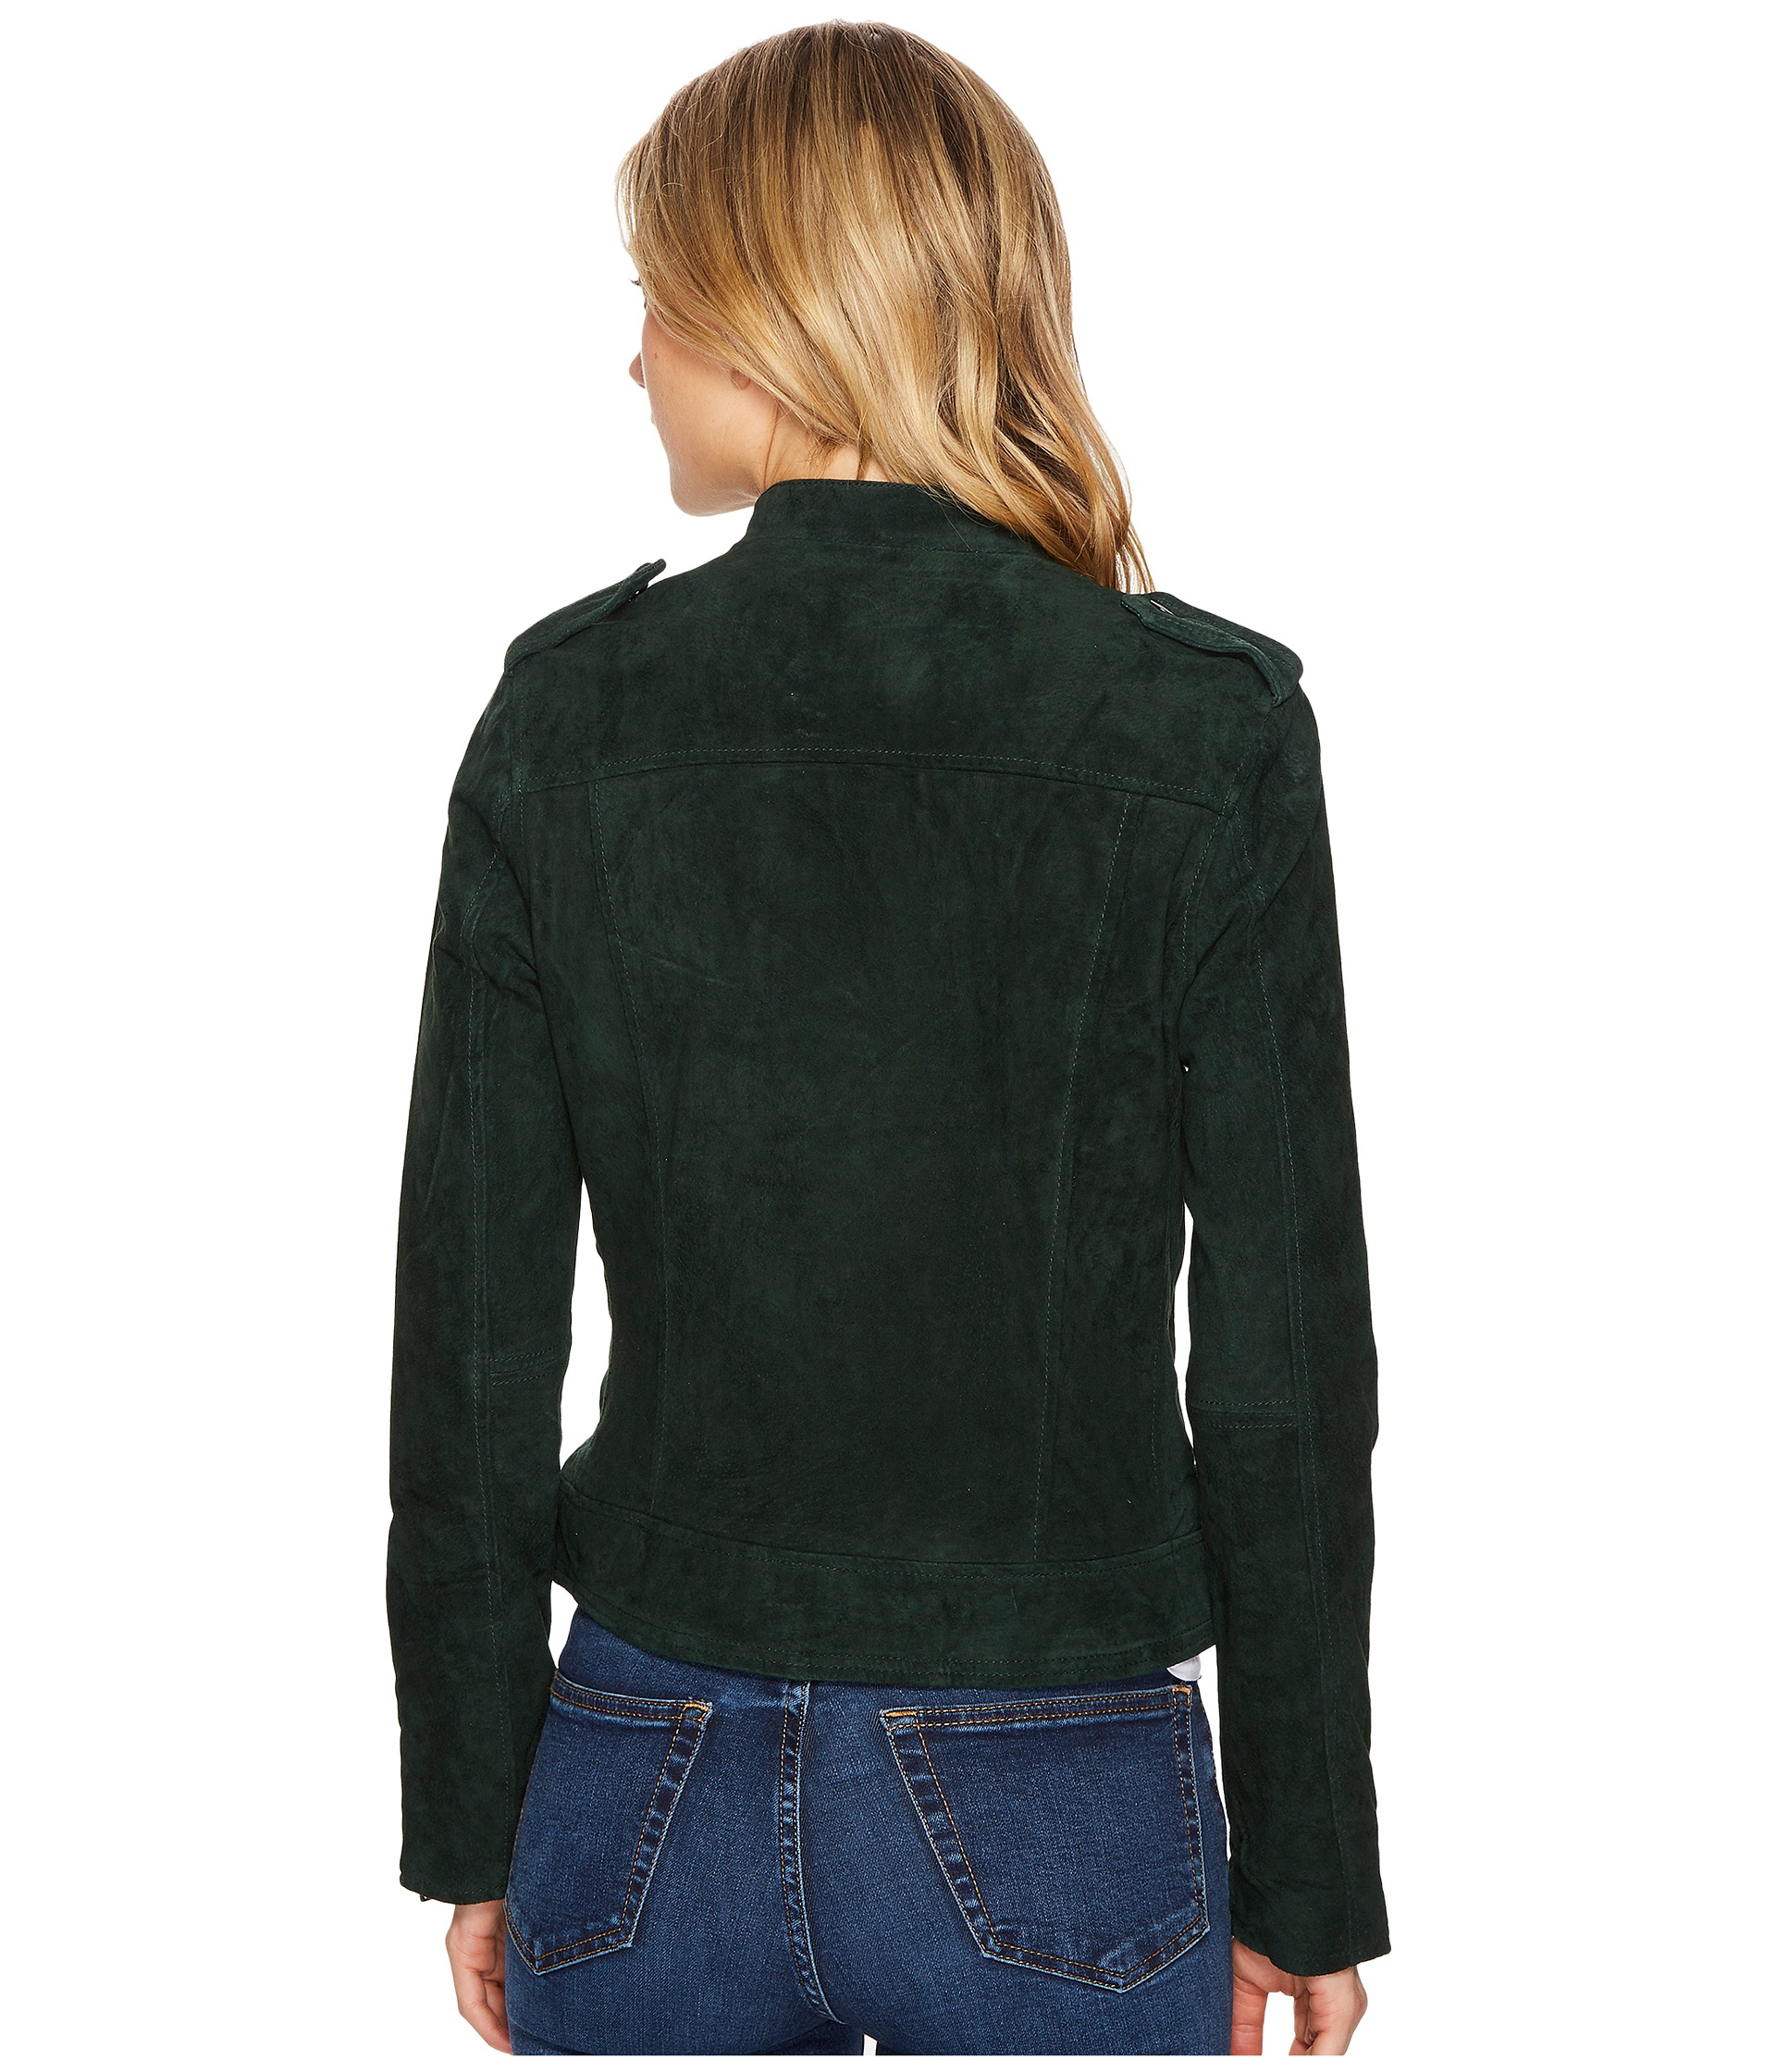 Blank NYC Emerald Green Moto Suede Jacket in Ever Green at Zappos.com